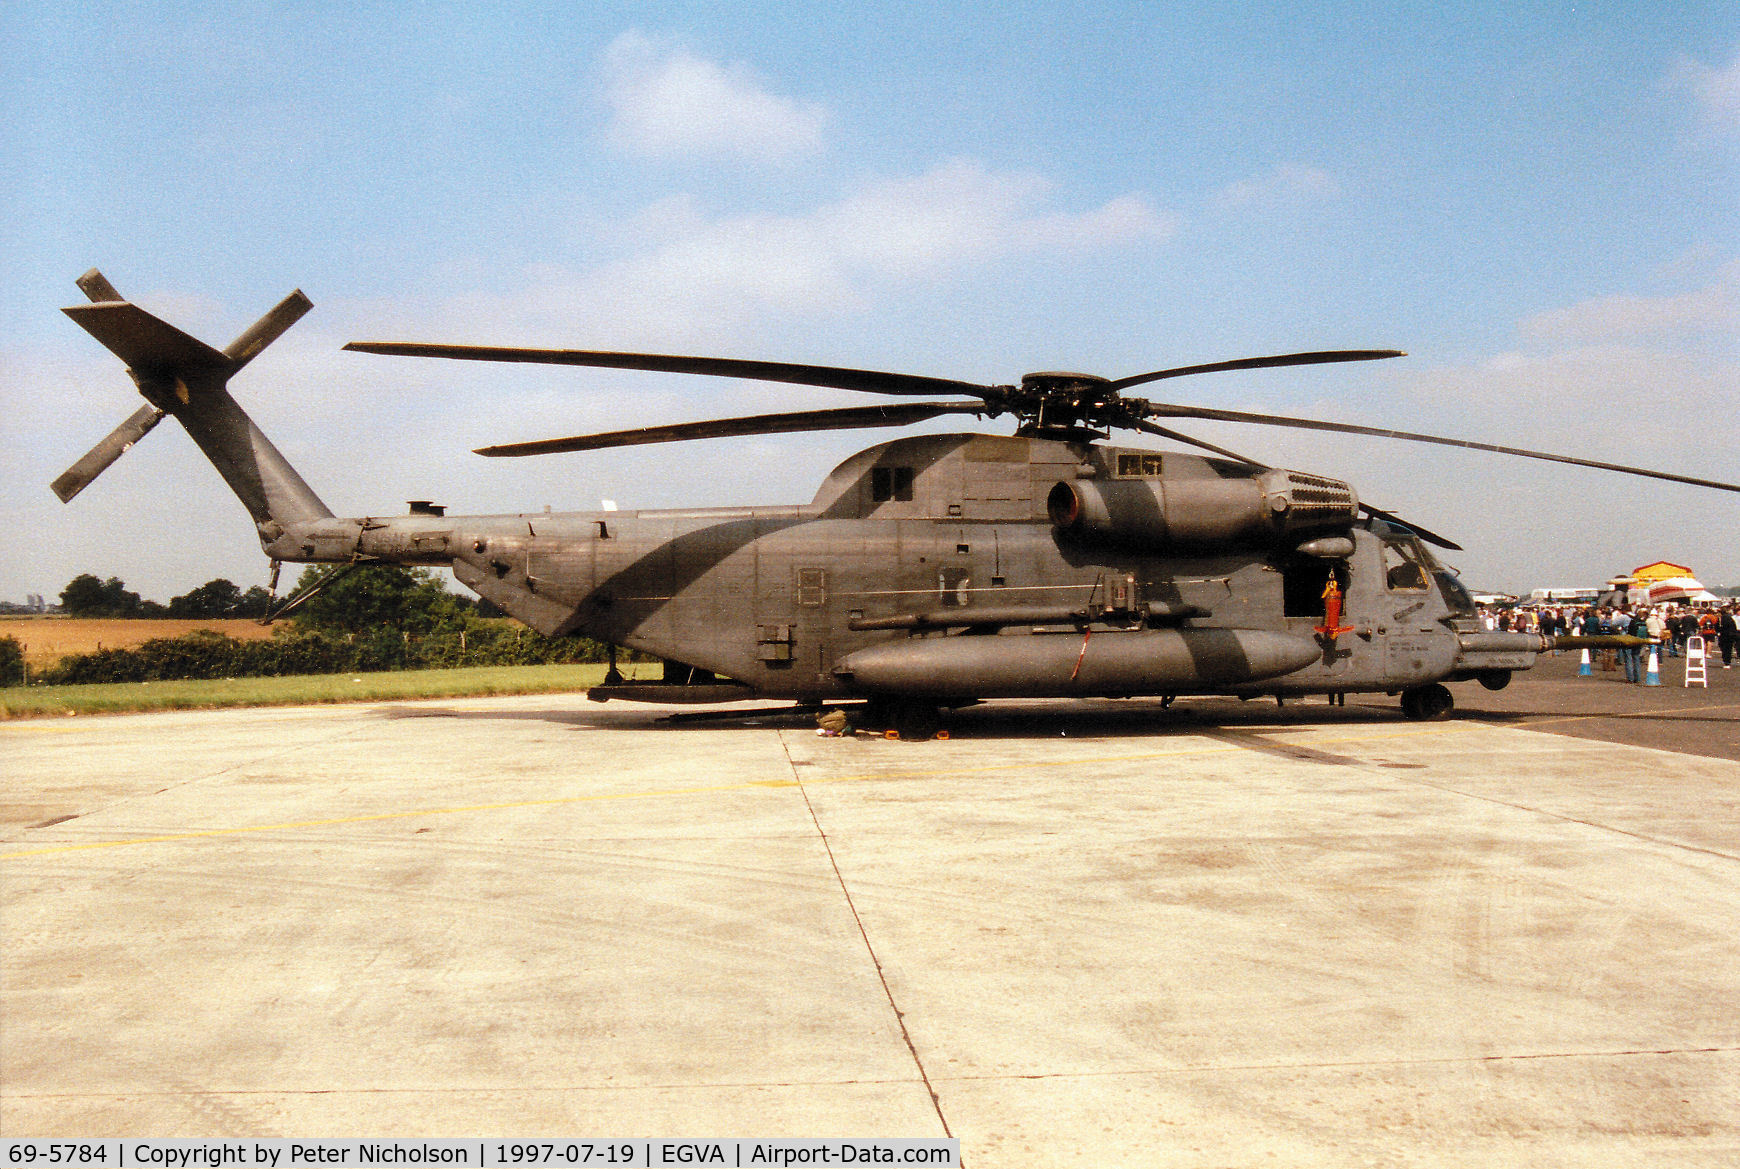 69-5784, 1969 Sikorsky MH-53J Pave Low III C/N 65-232, Pave Low III, callsign Pave 55, of RAF Mildenhall's 21st Special Operations Squadron on display at the 1997 Intnl Air Tattoo at RAF Fairford.